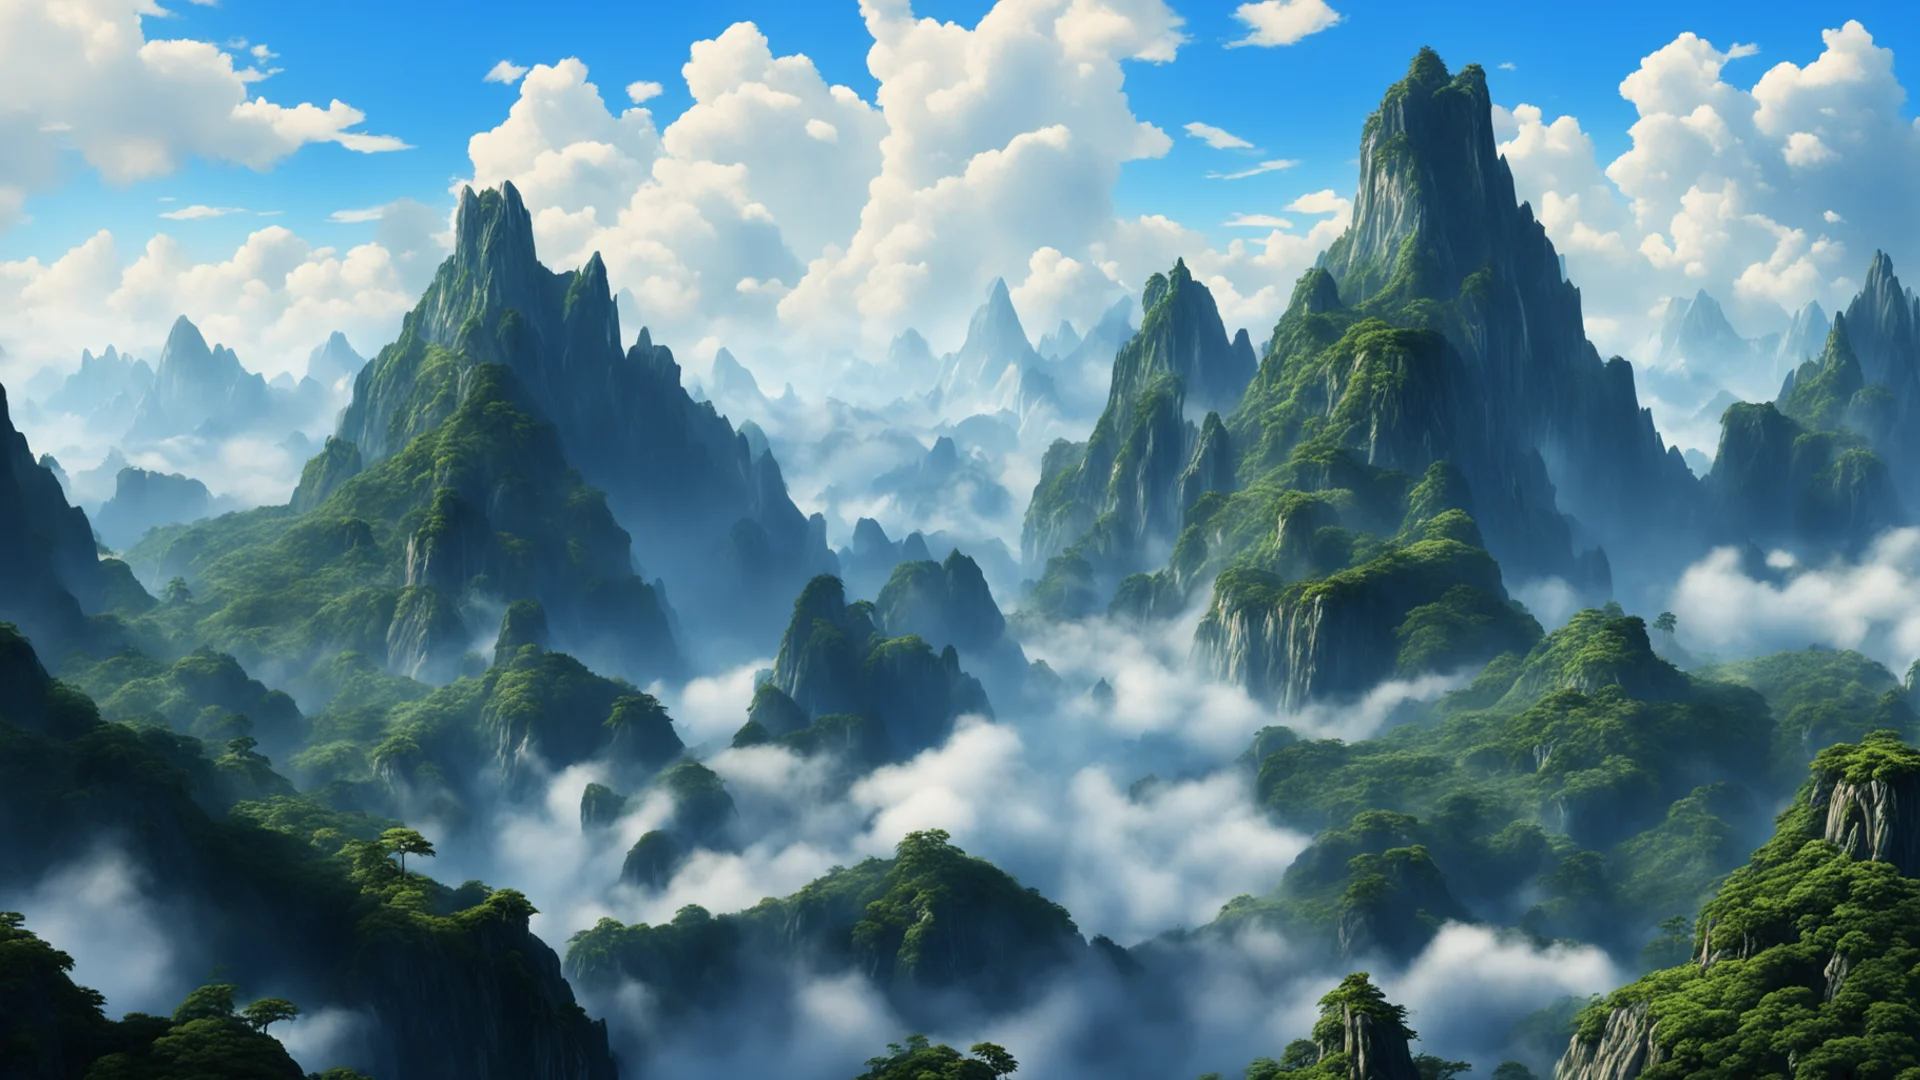 aiflying mountains from the movie avatar. superrealism amazing awesome portrait 2 wide